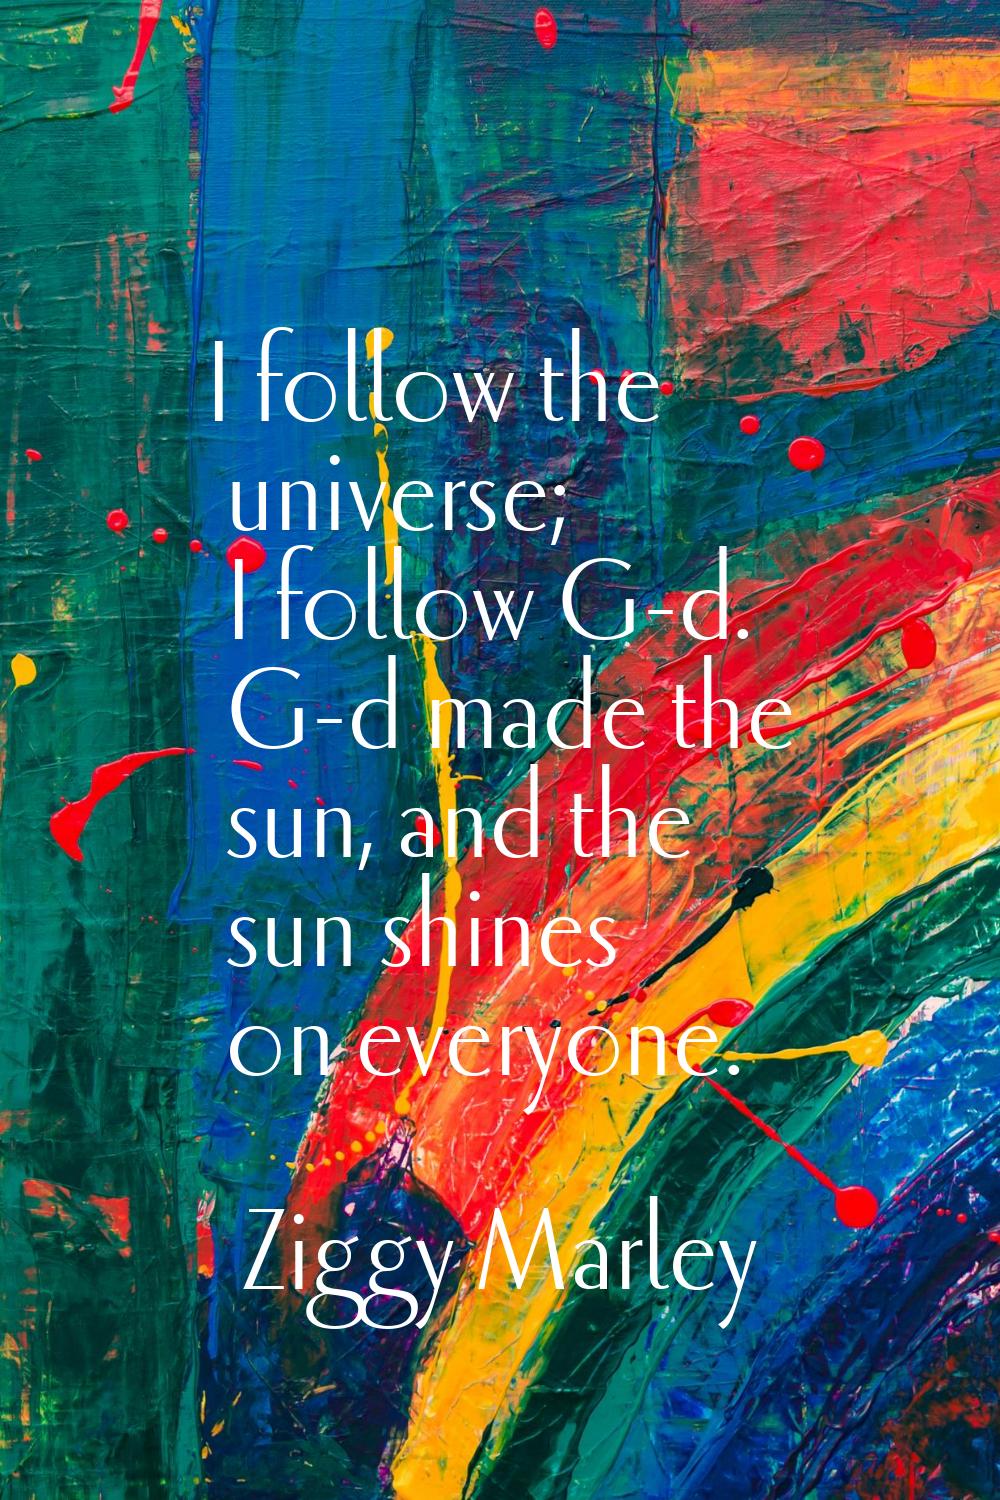 I follow the universe; I follow G-d. G-d made the sun, and the sun shines on everyone.